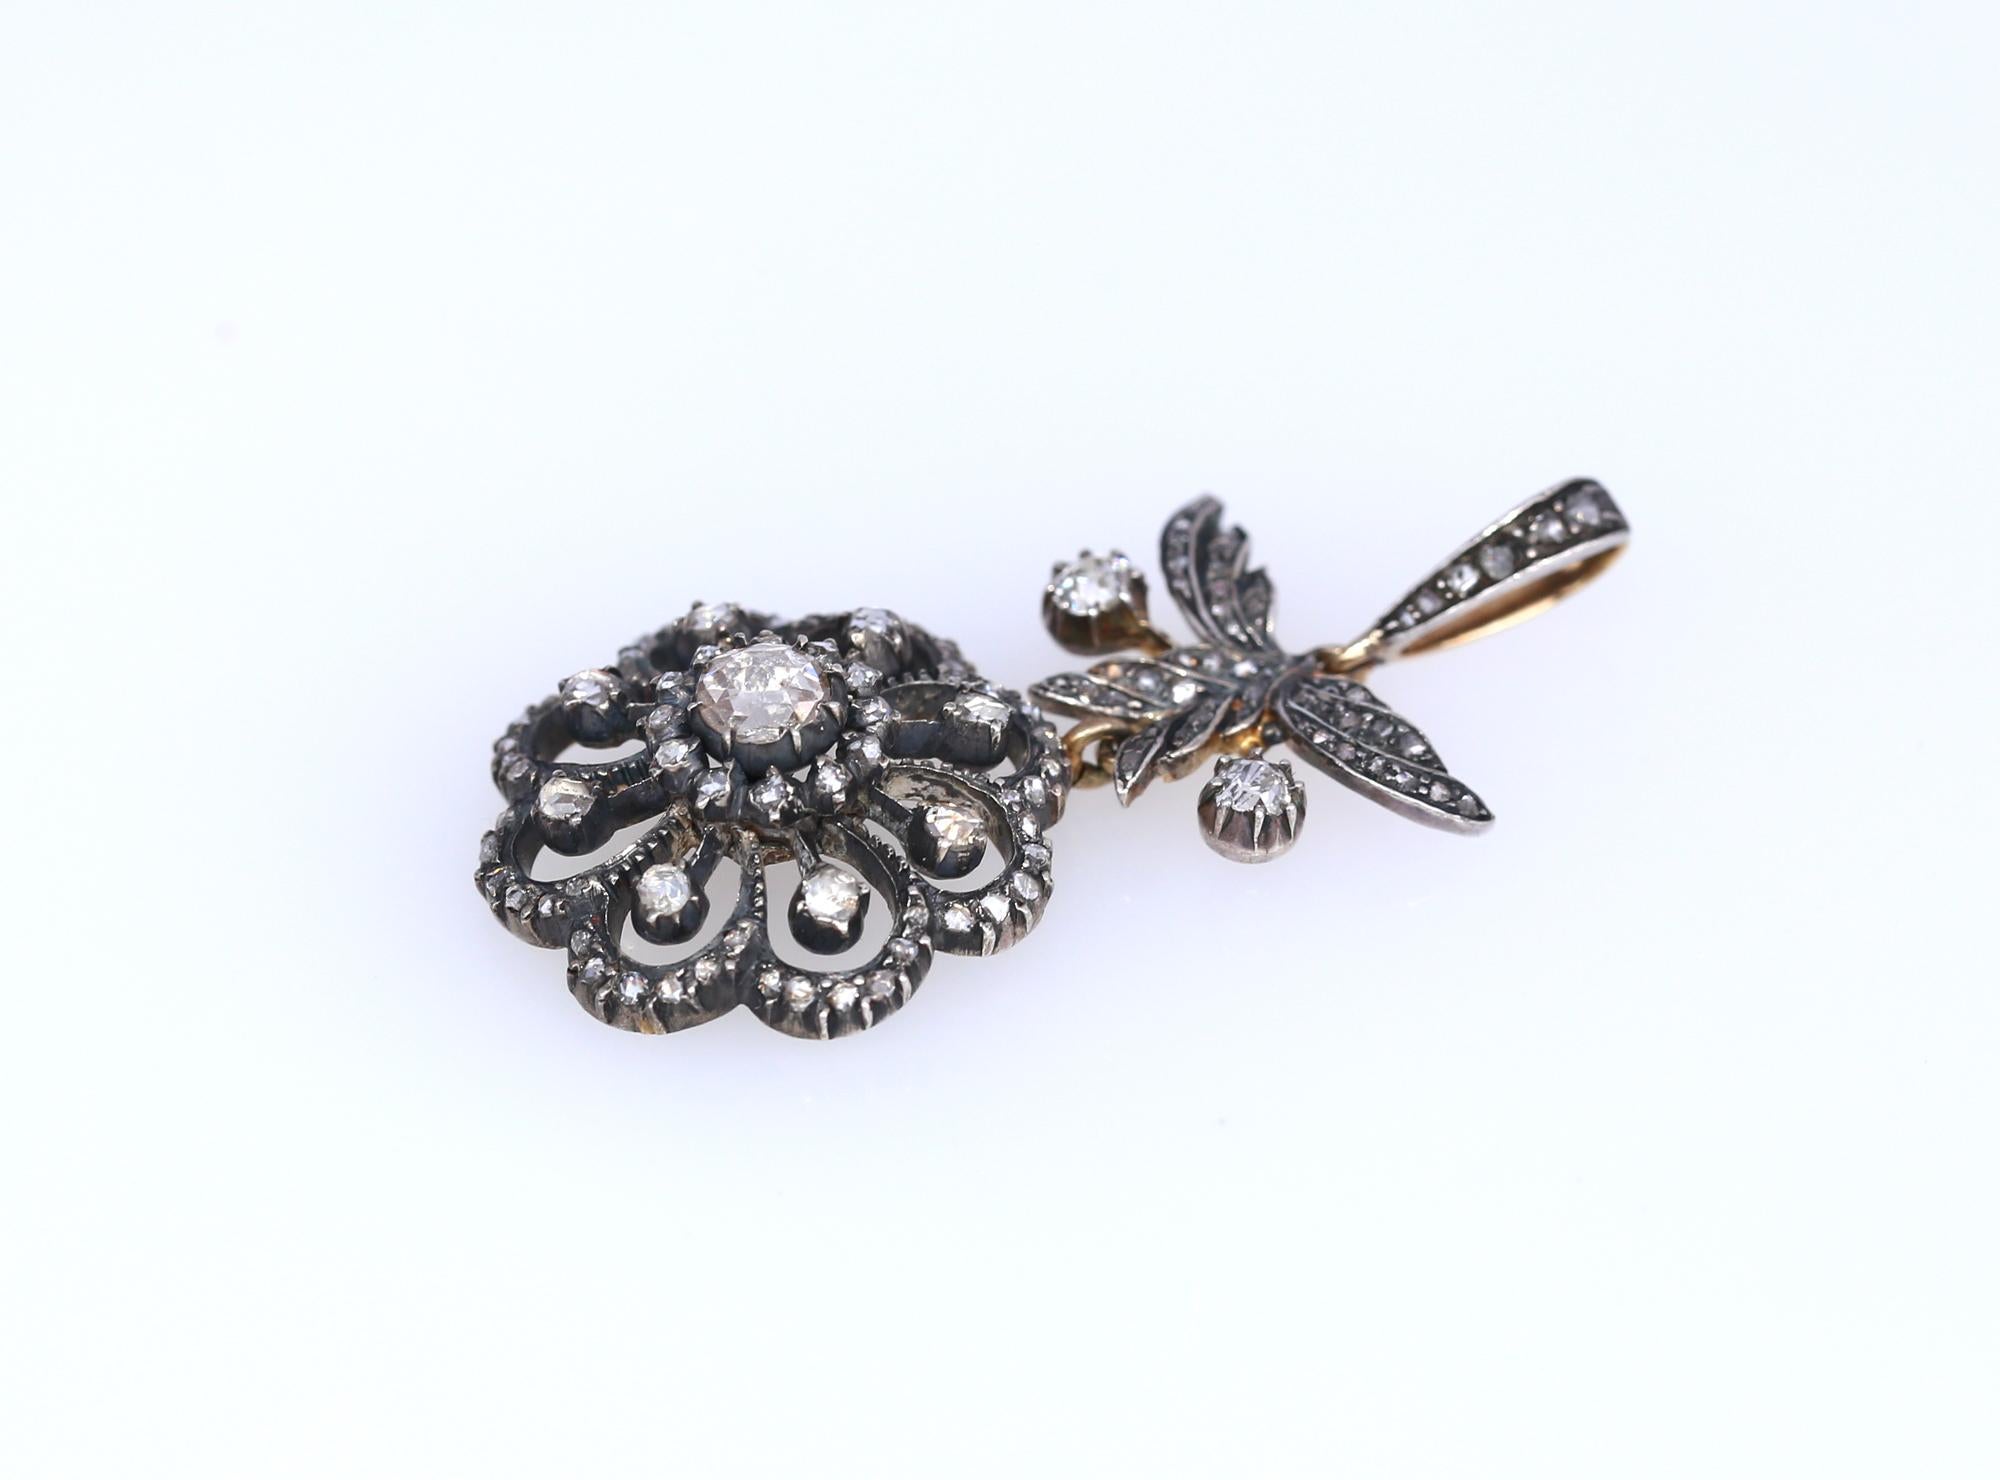 Victorian Pendant Rose-Cut Diamonds Flower, 1890
Victorian Rose-cut Diamonds Pendant depicting a flower. A fine pendant consists of three parts interlinked to be moving freely on the body. This a superb example of the late Victorian era. Executed